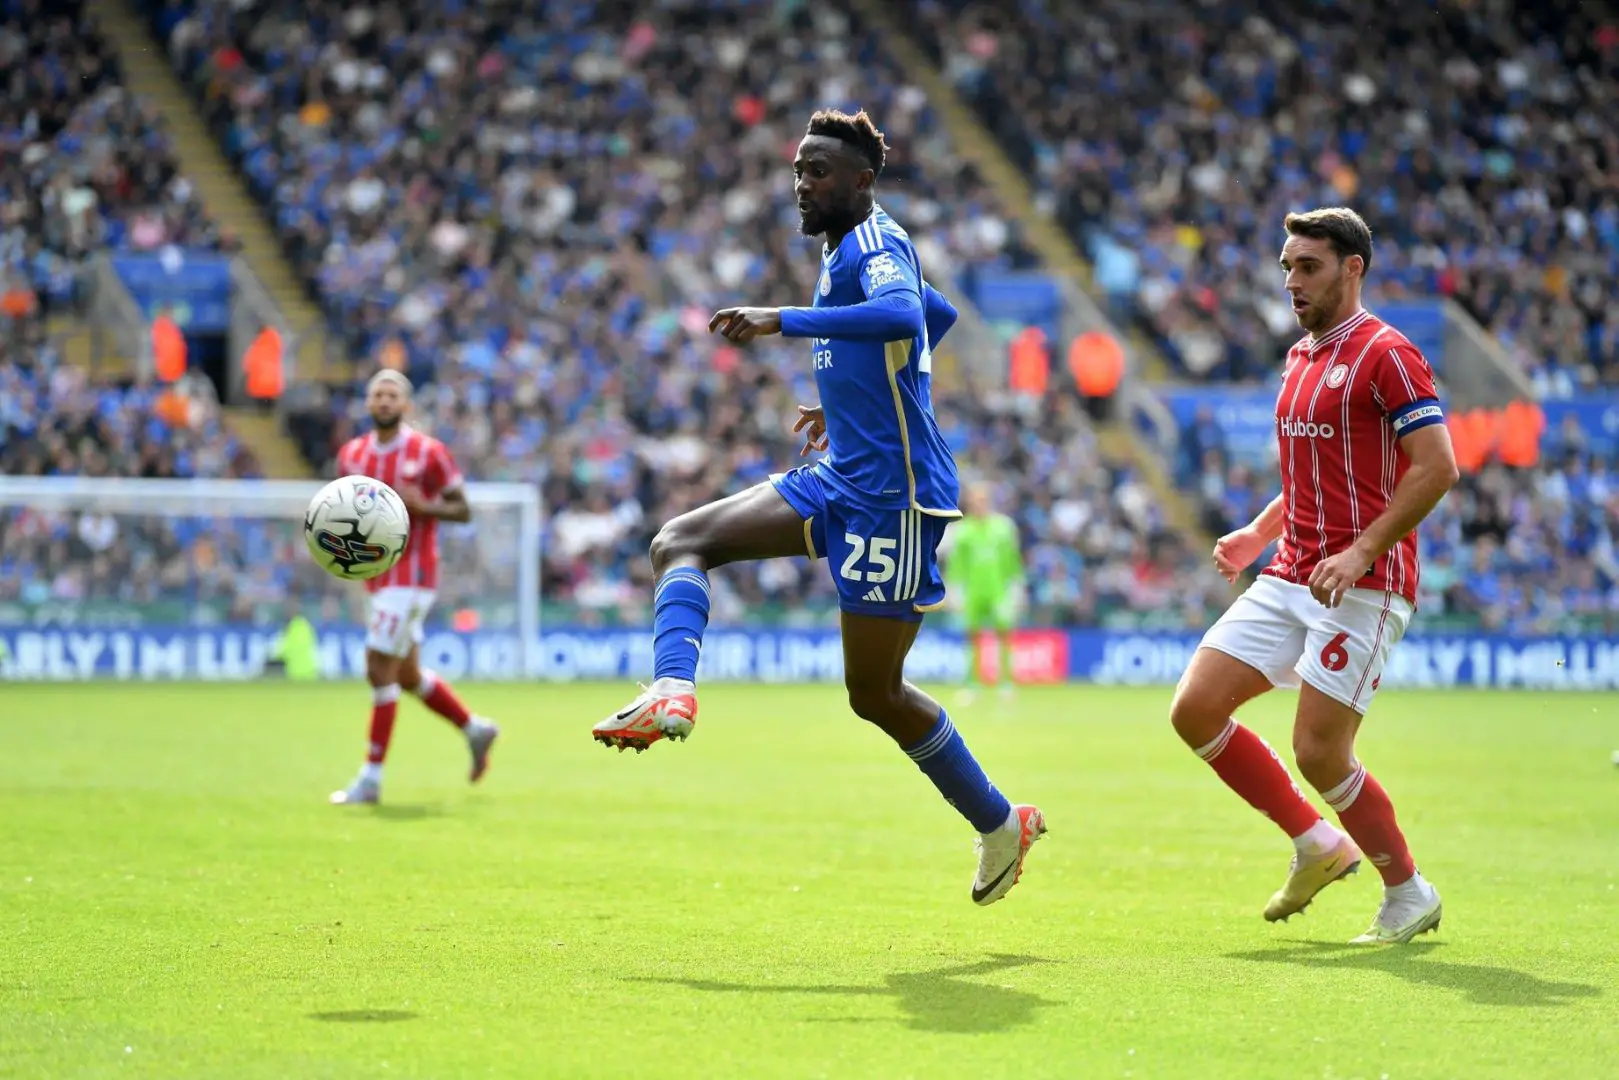 Barcelona midfield target Wilfred Ndidi of Leicester City